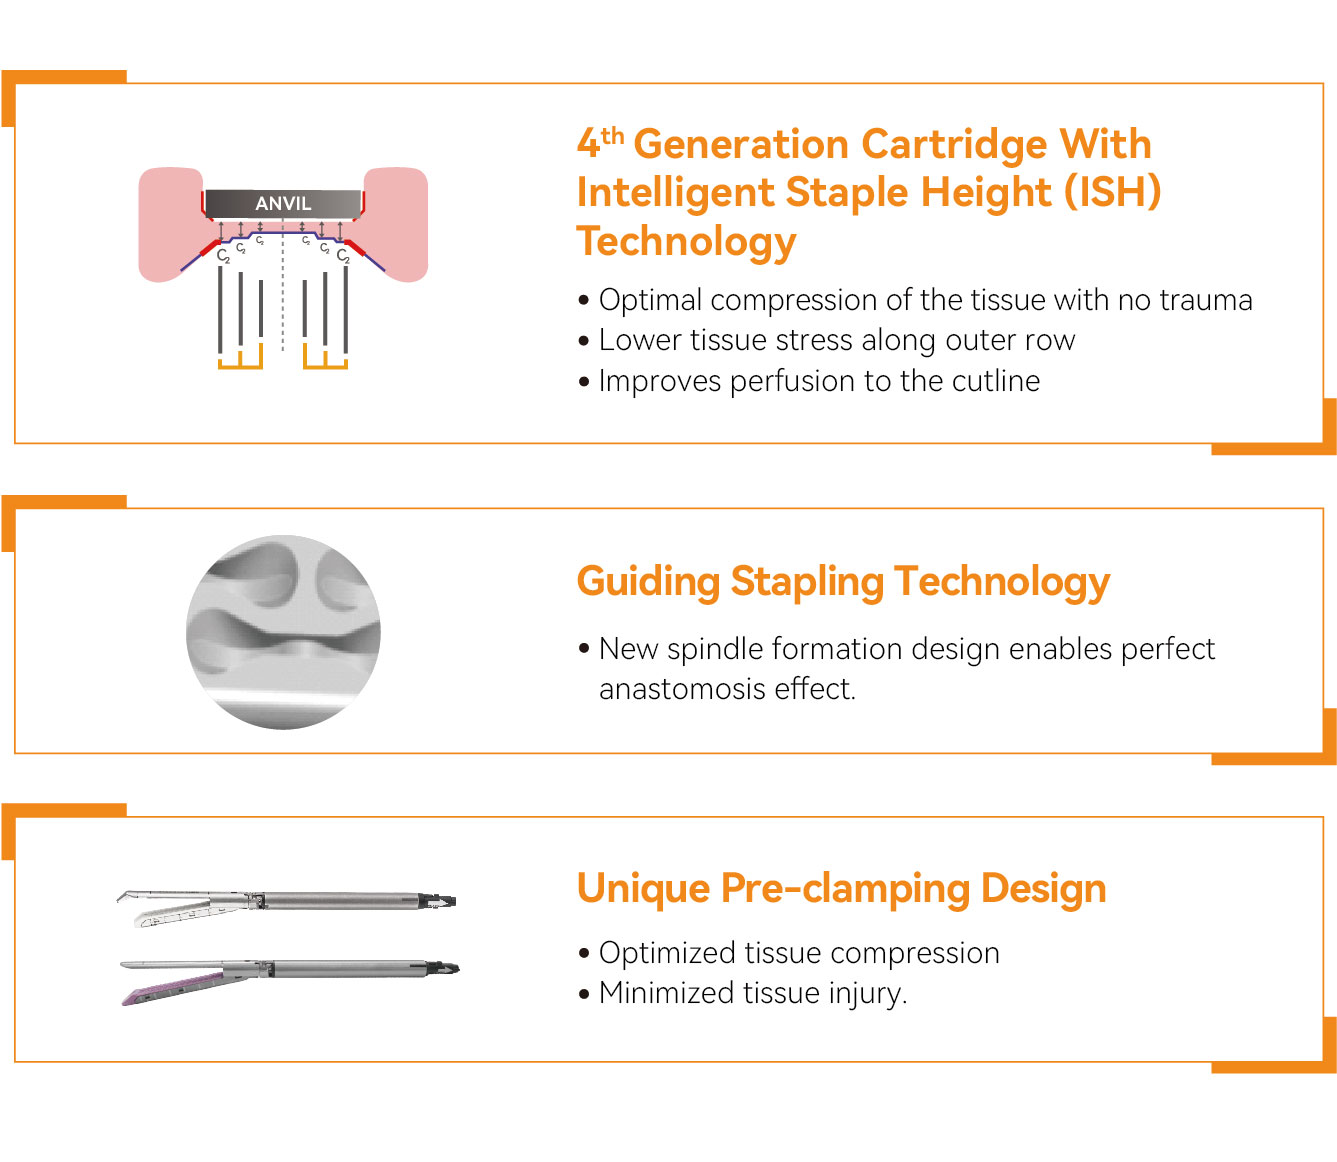 Disposable Endoscopic Linear Cutter Product Details